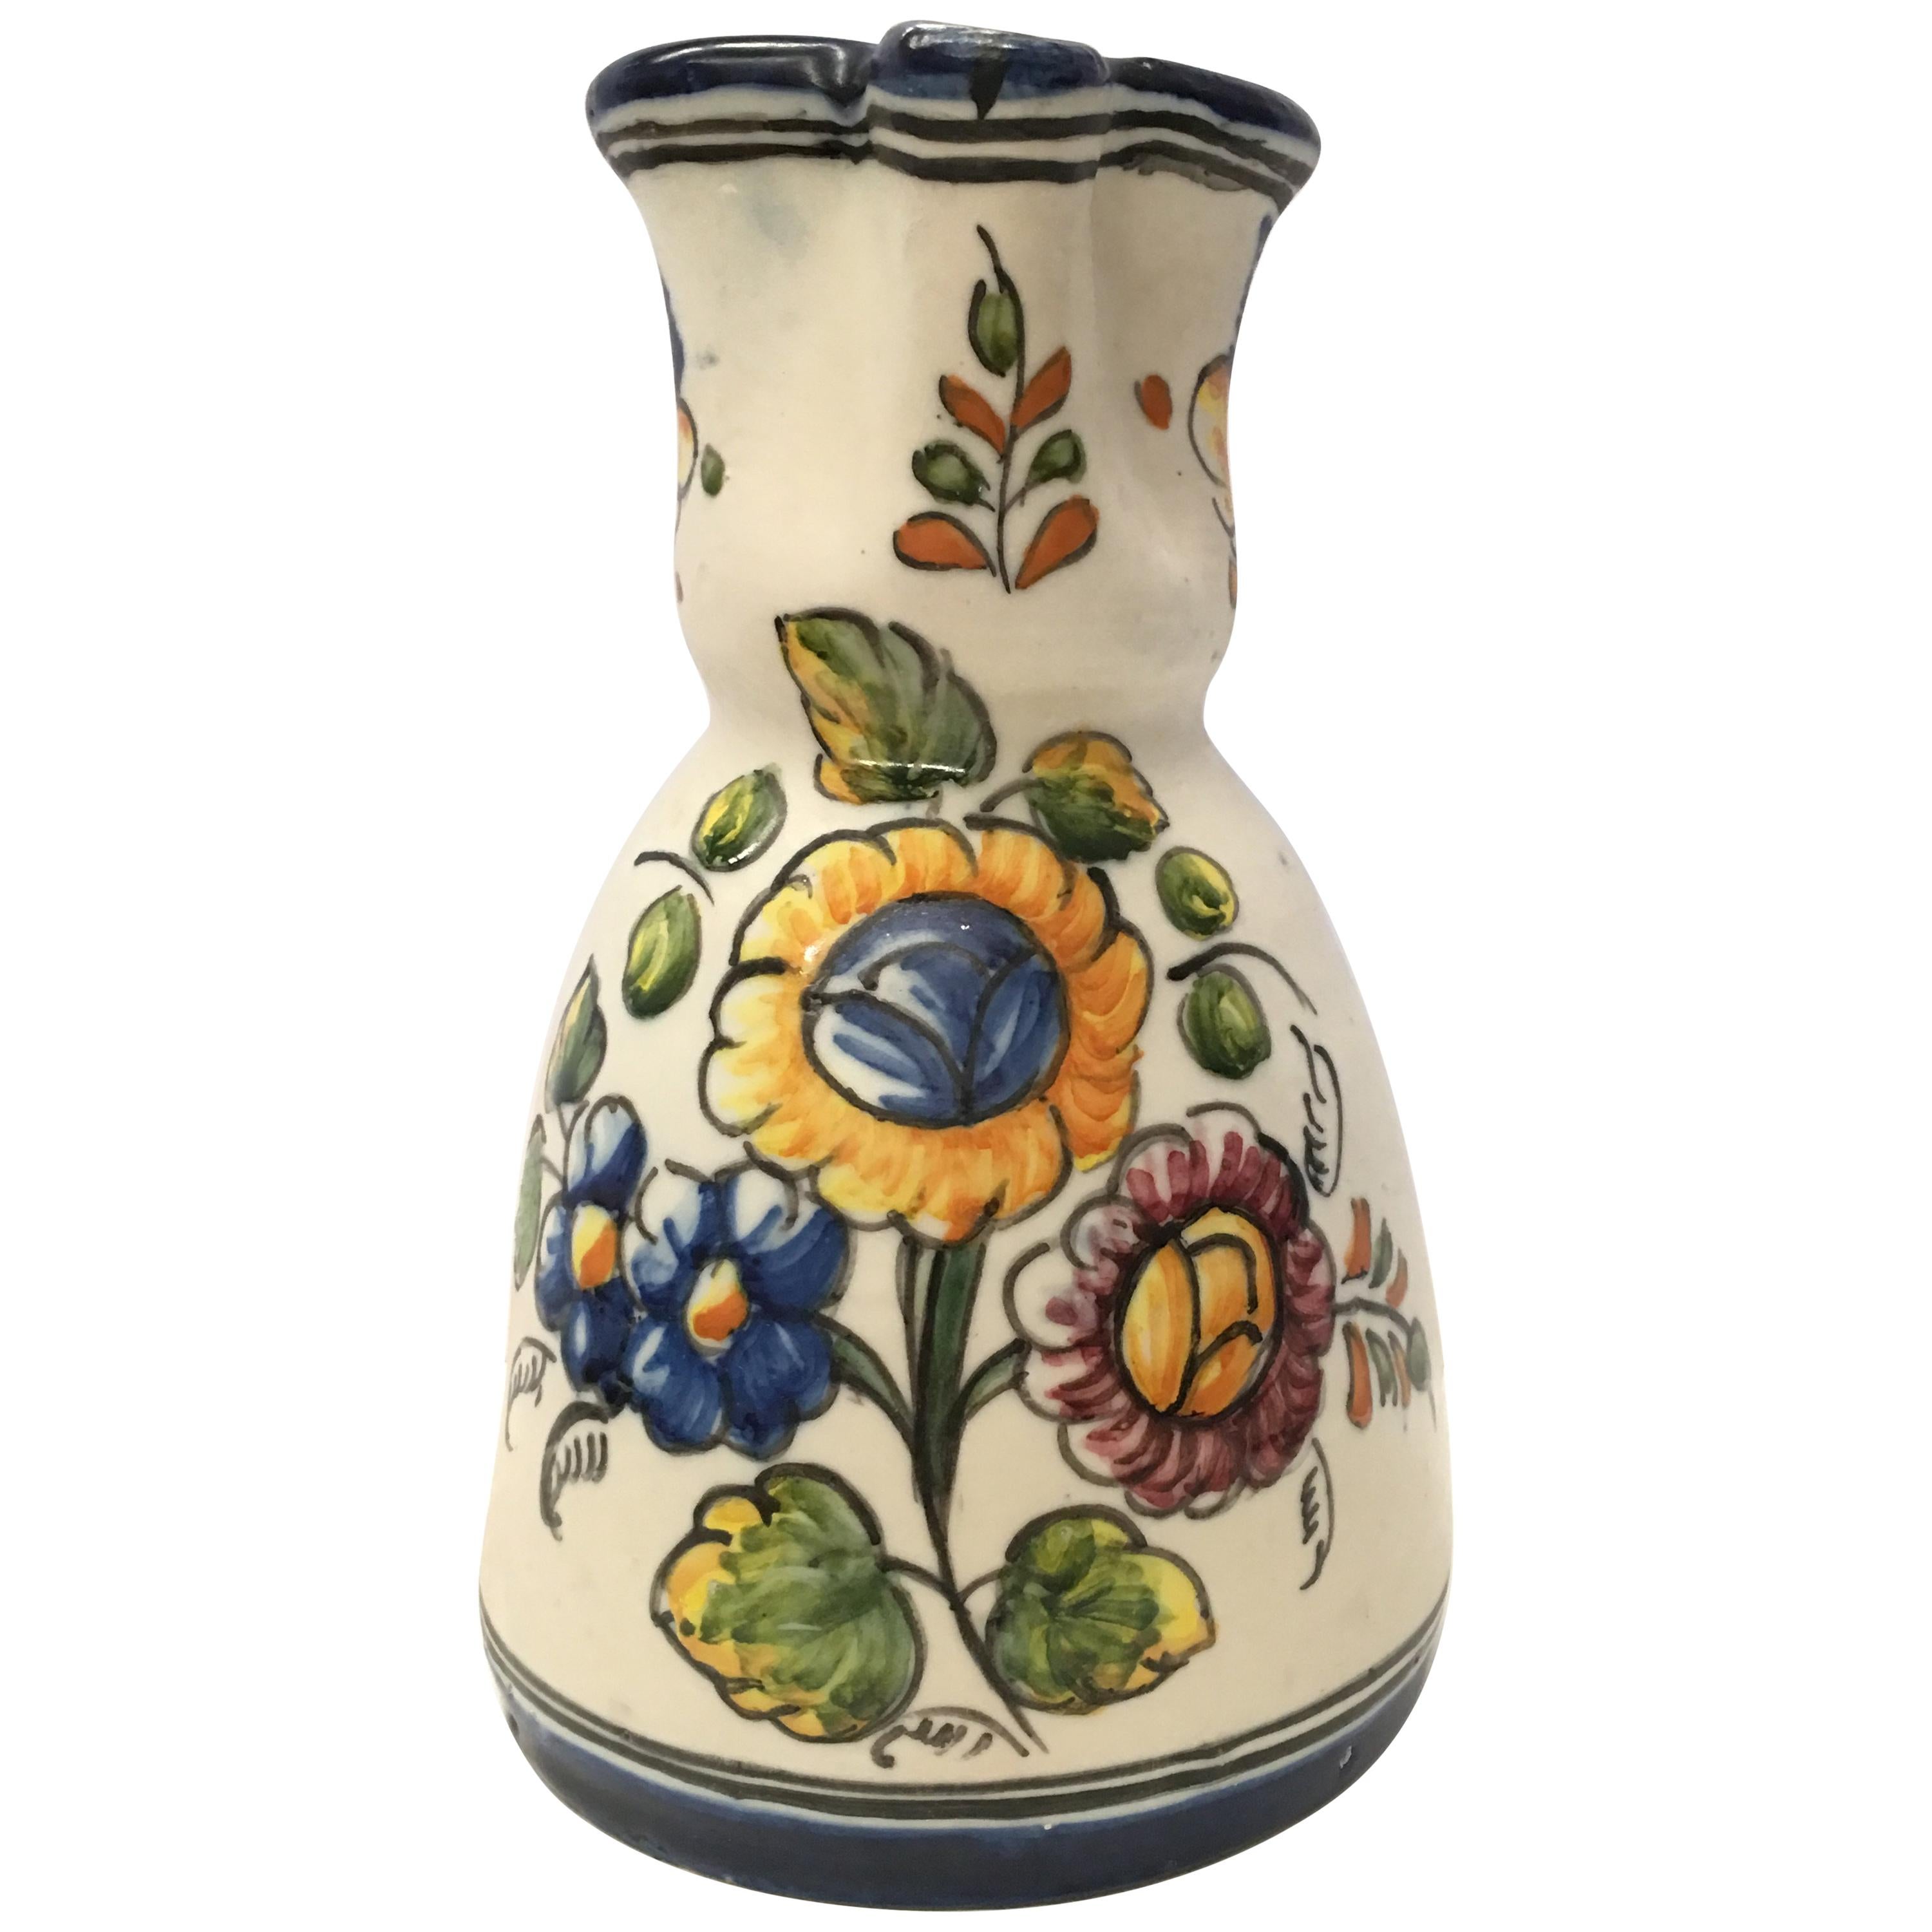 19th Century French Glazed Terracotta Pitcher Handmade & Hand-painted